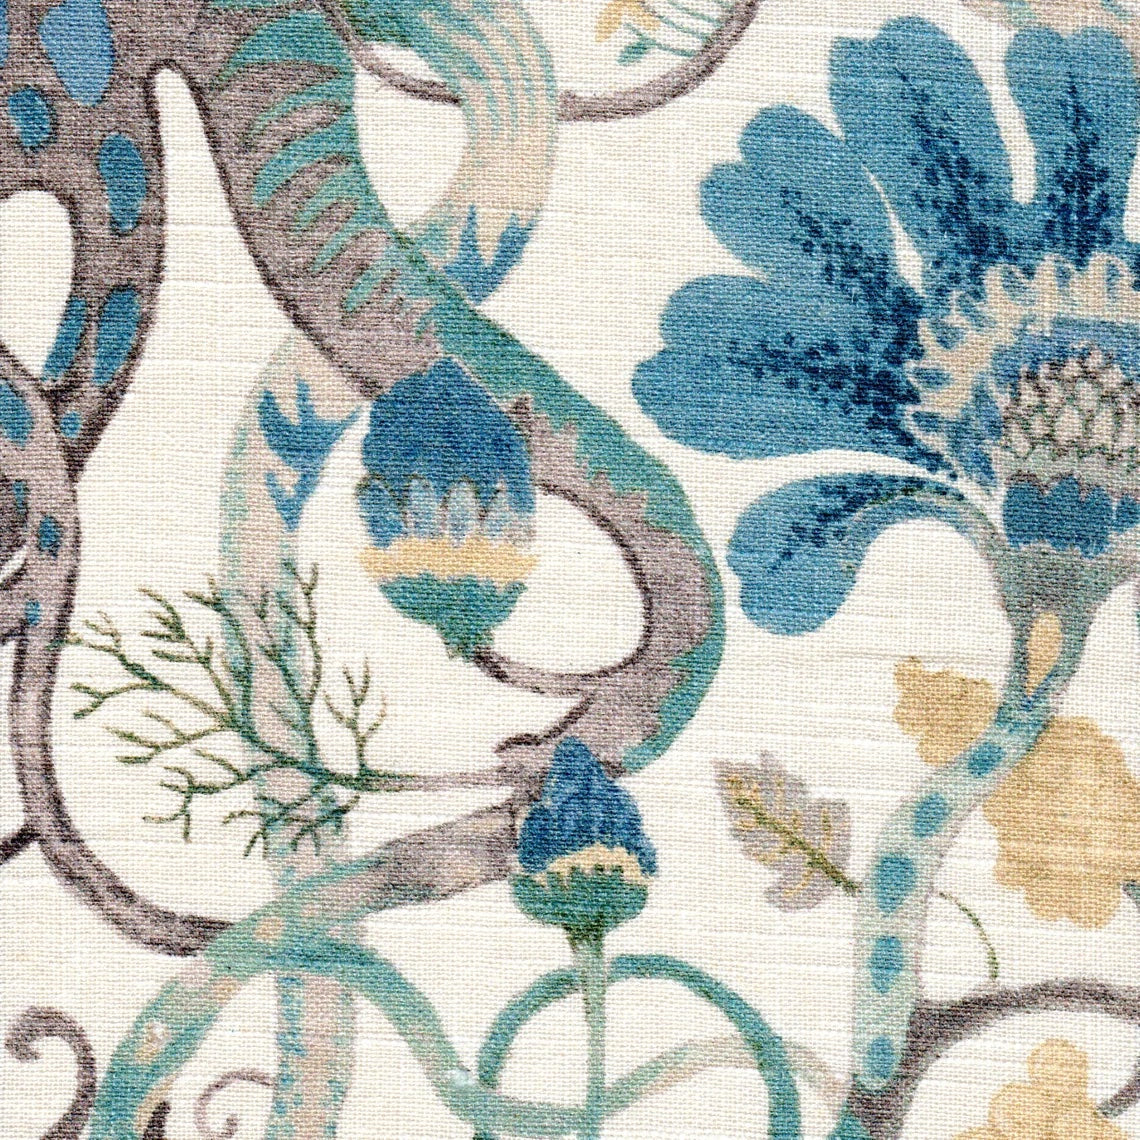 Pillow Sham in Tudor Antique Blue Jacobean Floral, Tree of Life, Large Scale Multi-Color